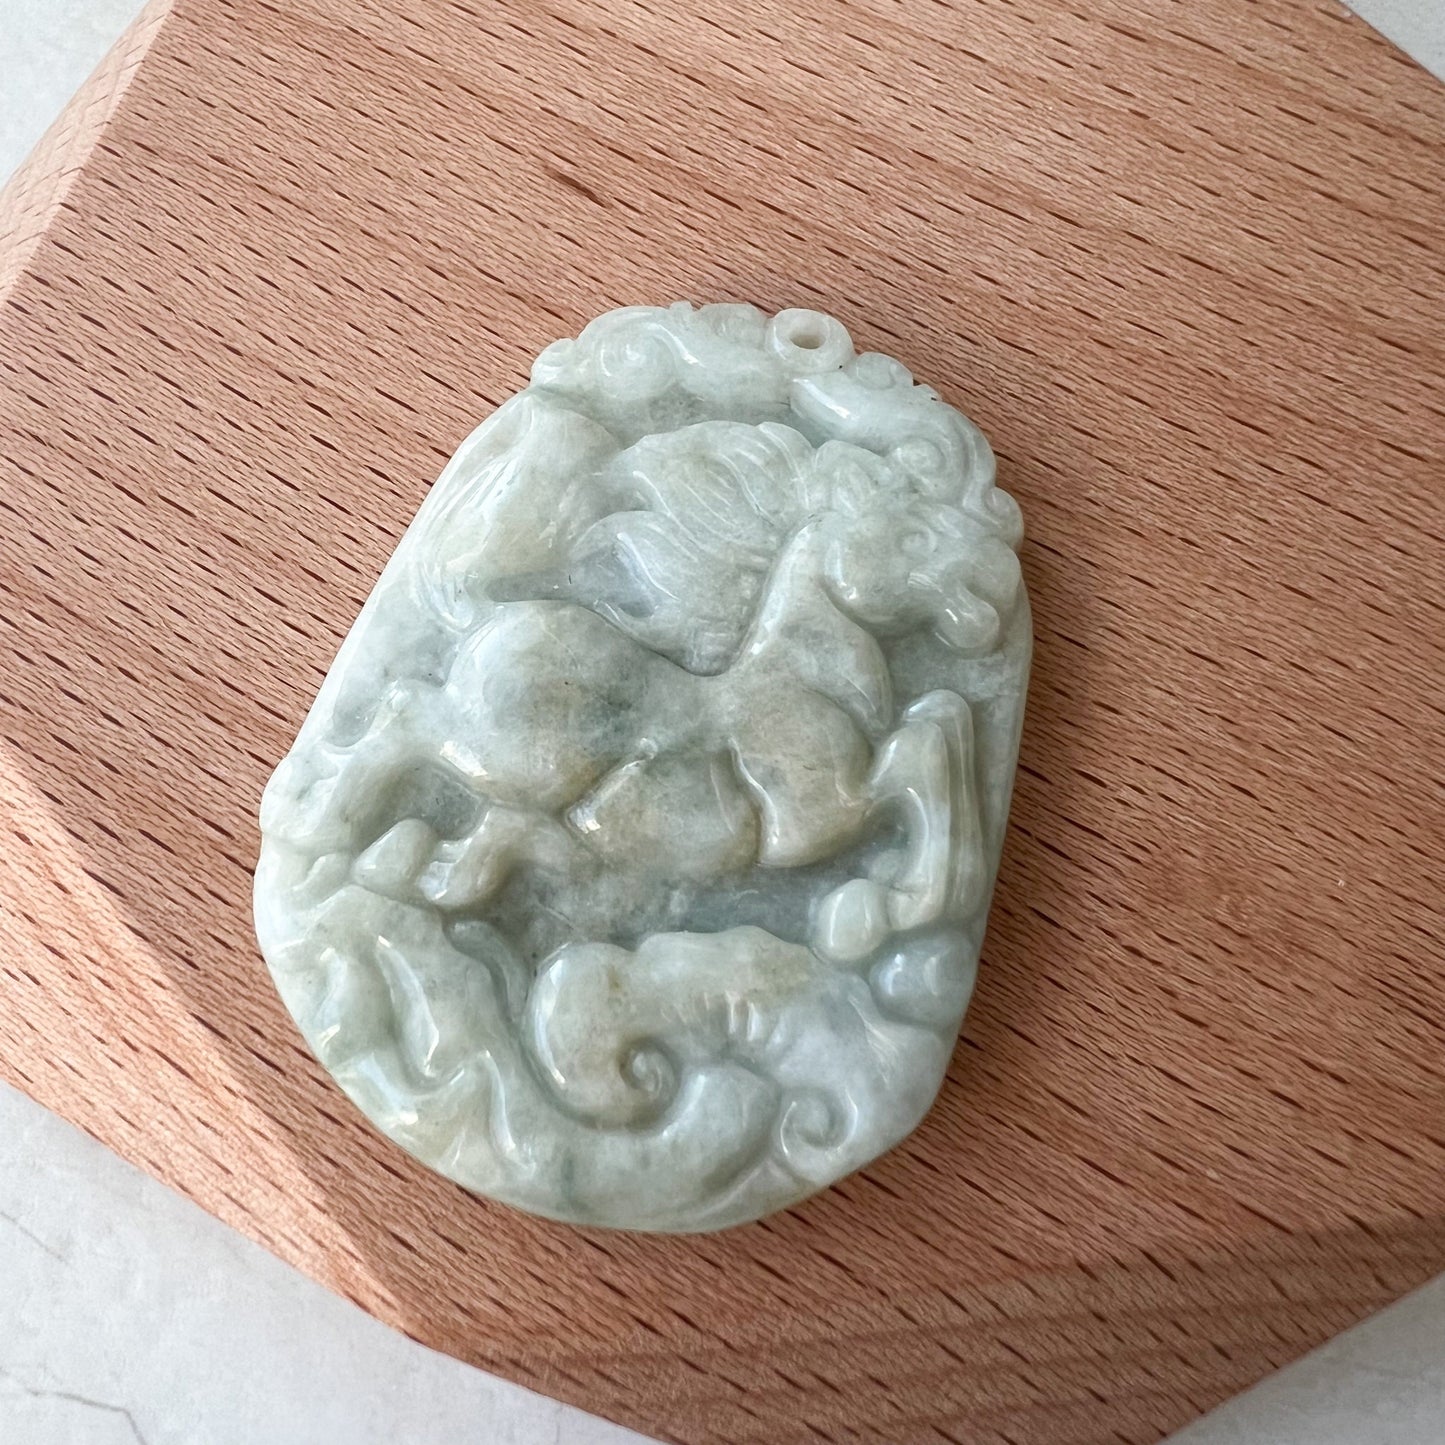 Horse Jade Chinese Zodiac Rustic Carved Pendant Necklace, YW-0321-1646161688 - AriaDesignCollection